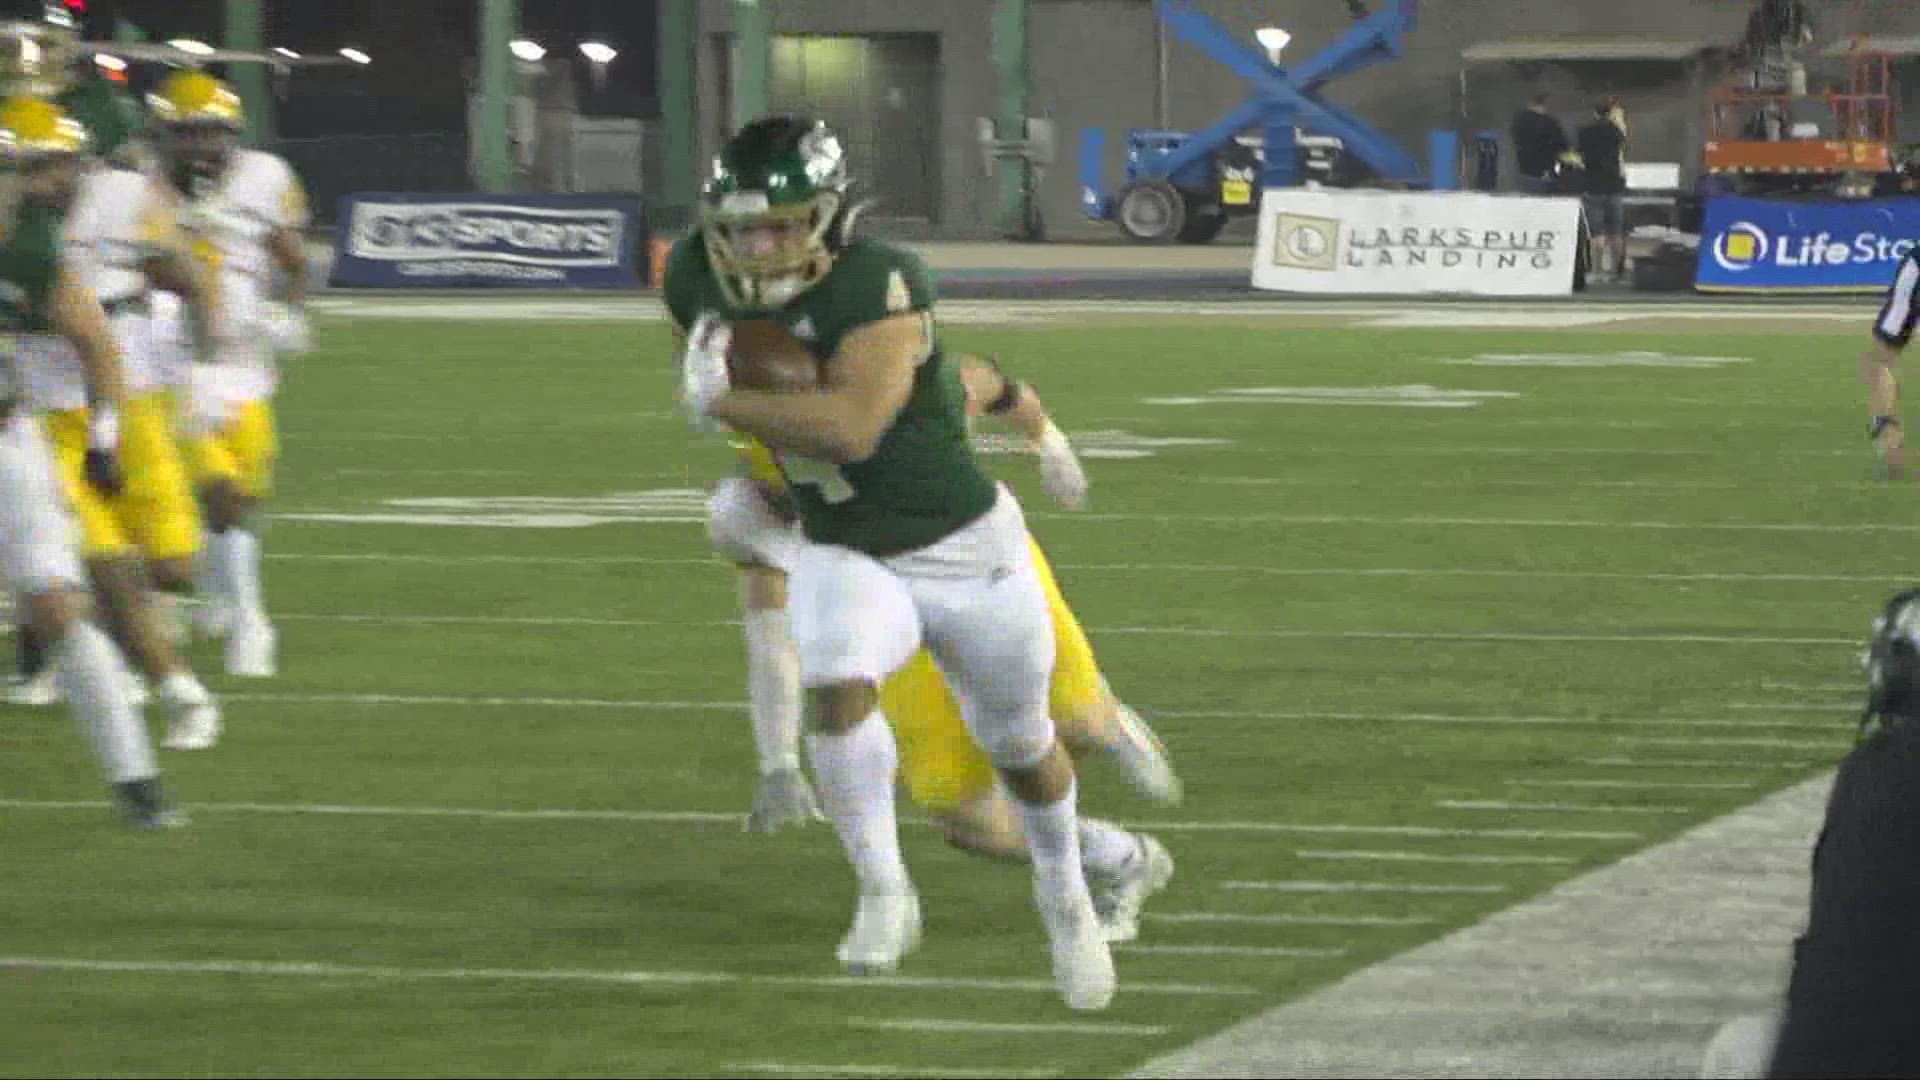 The Sac State Hornets defeated the Idaho Vandals 31-28.